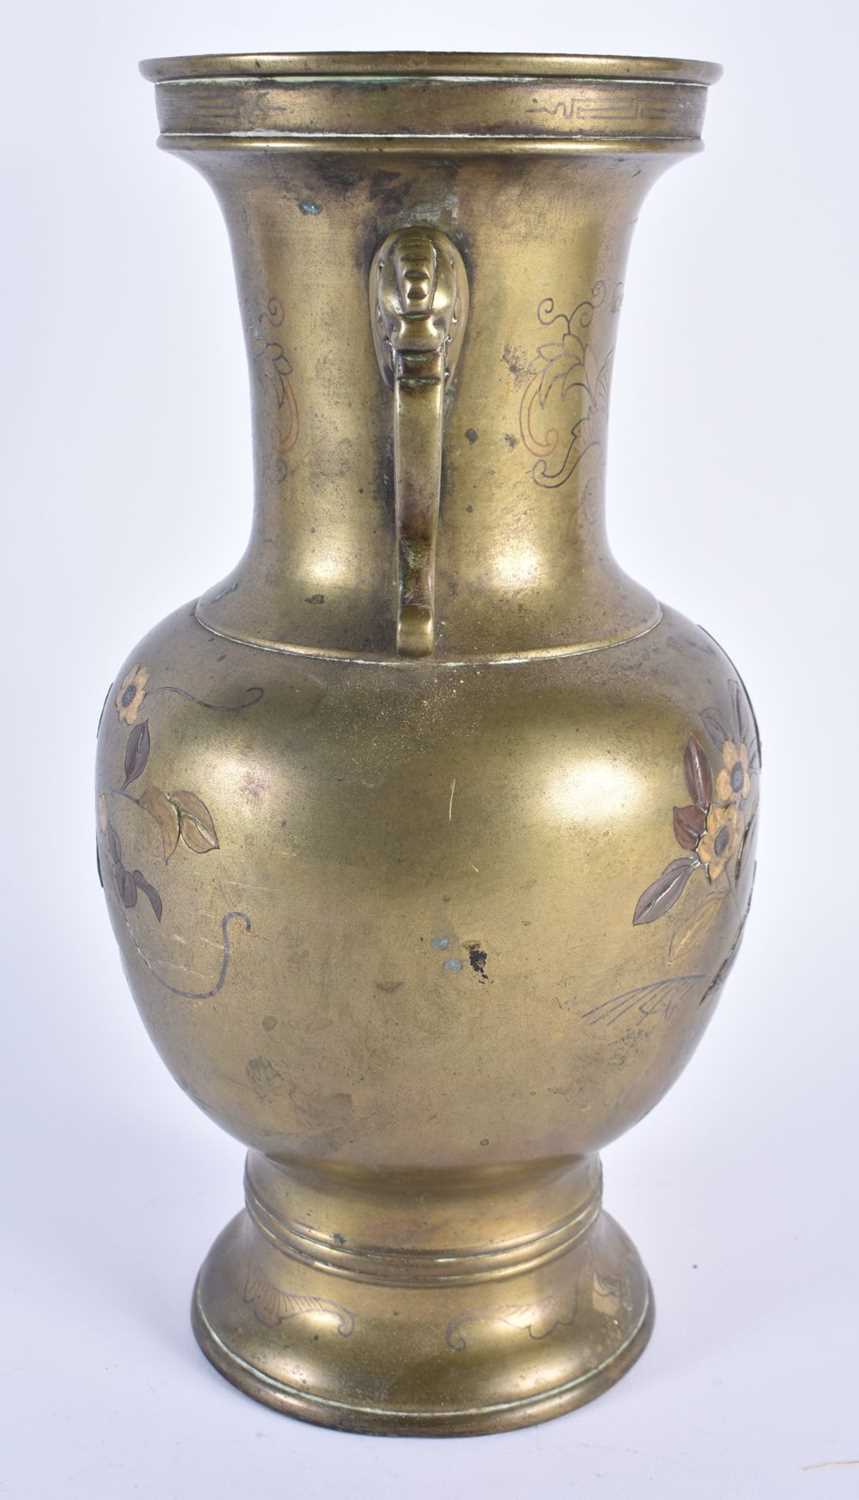 A LARGE 19TH CENTURY JAPANESE MEIJI PERIOD MIXED METAL BRONZE VASE inlaid with foliage. 30cm x 12 - Image 2 of 5